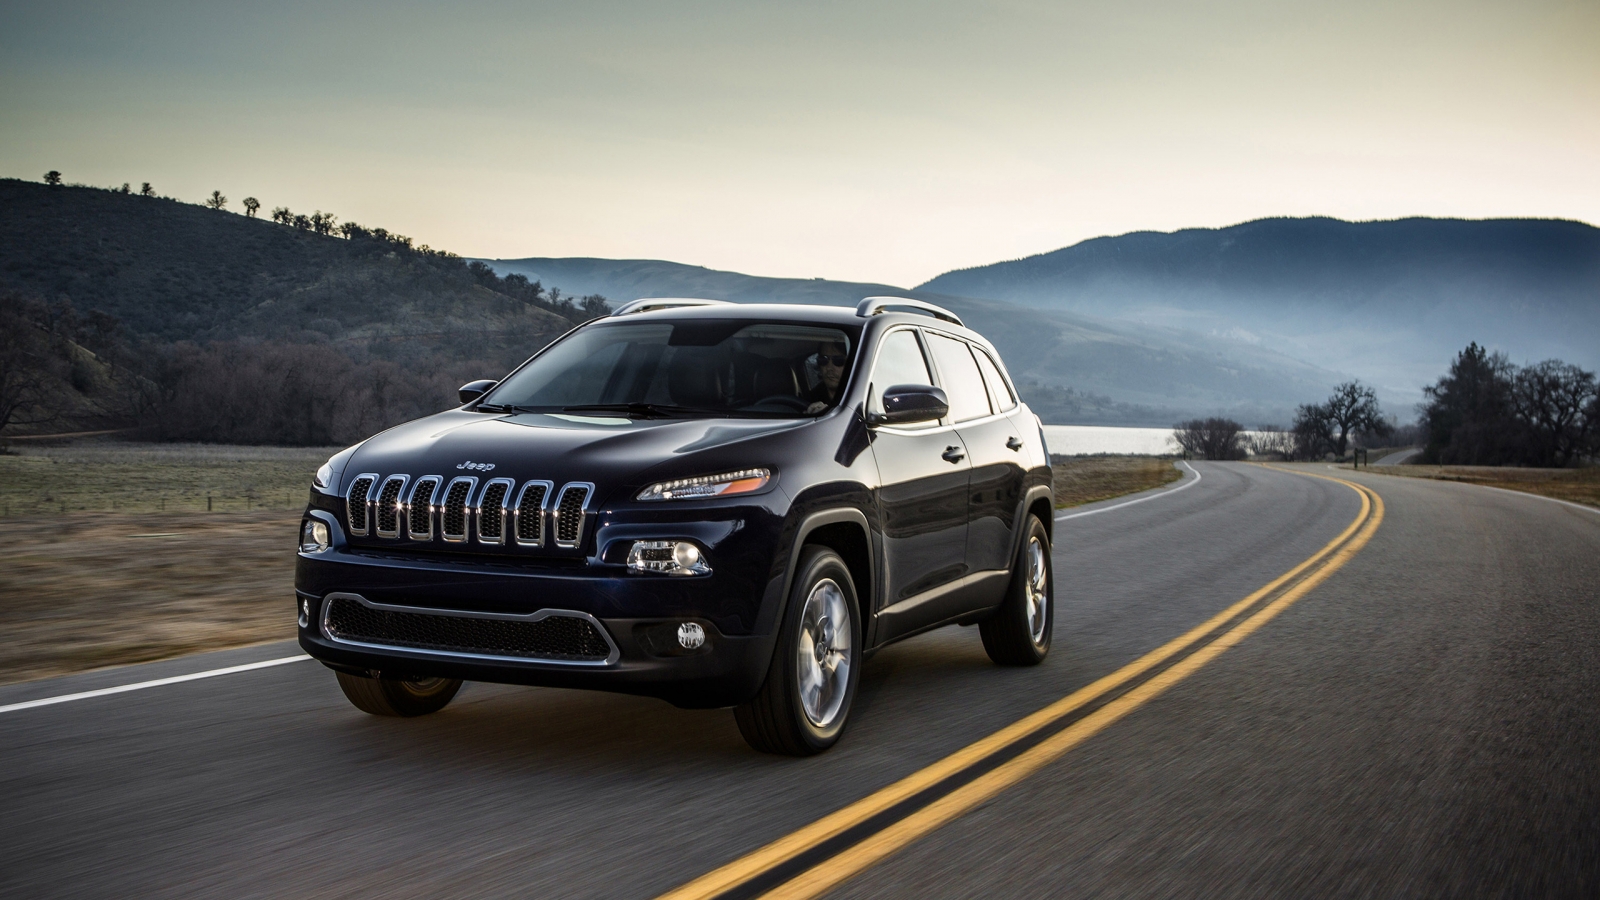 Jeep Cherokee 2014 Edition for 1600 x 900 HDTV resolution